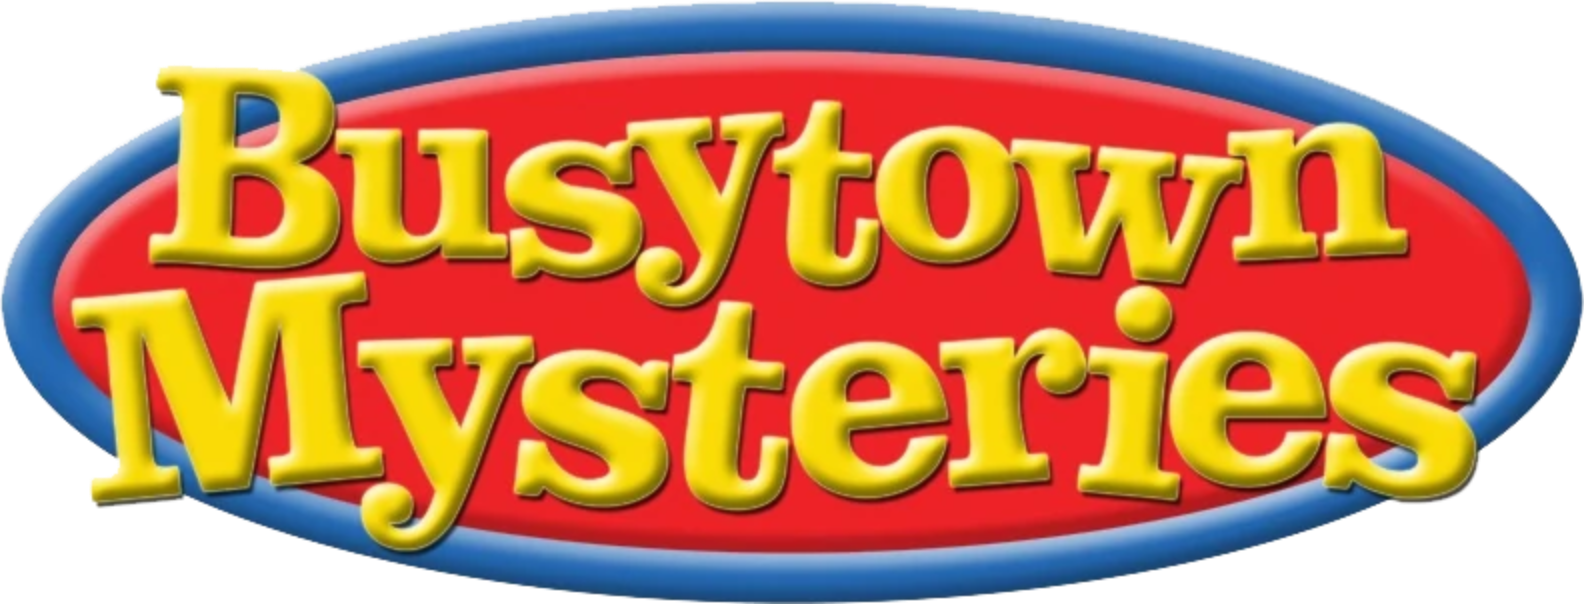 Busytown Mysteries Complete 